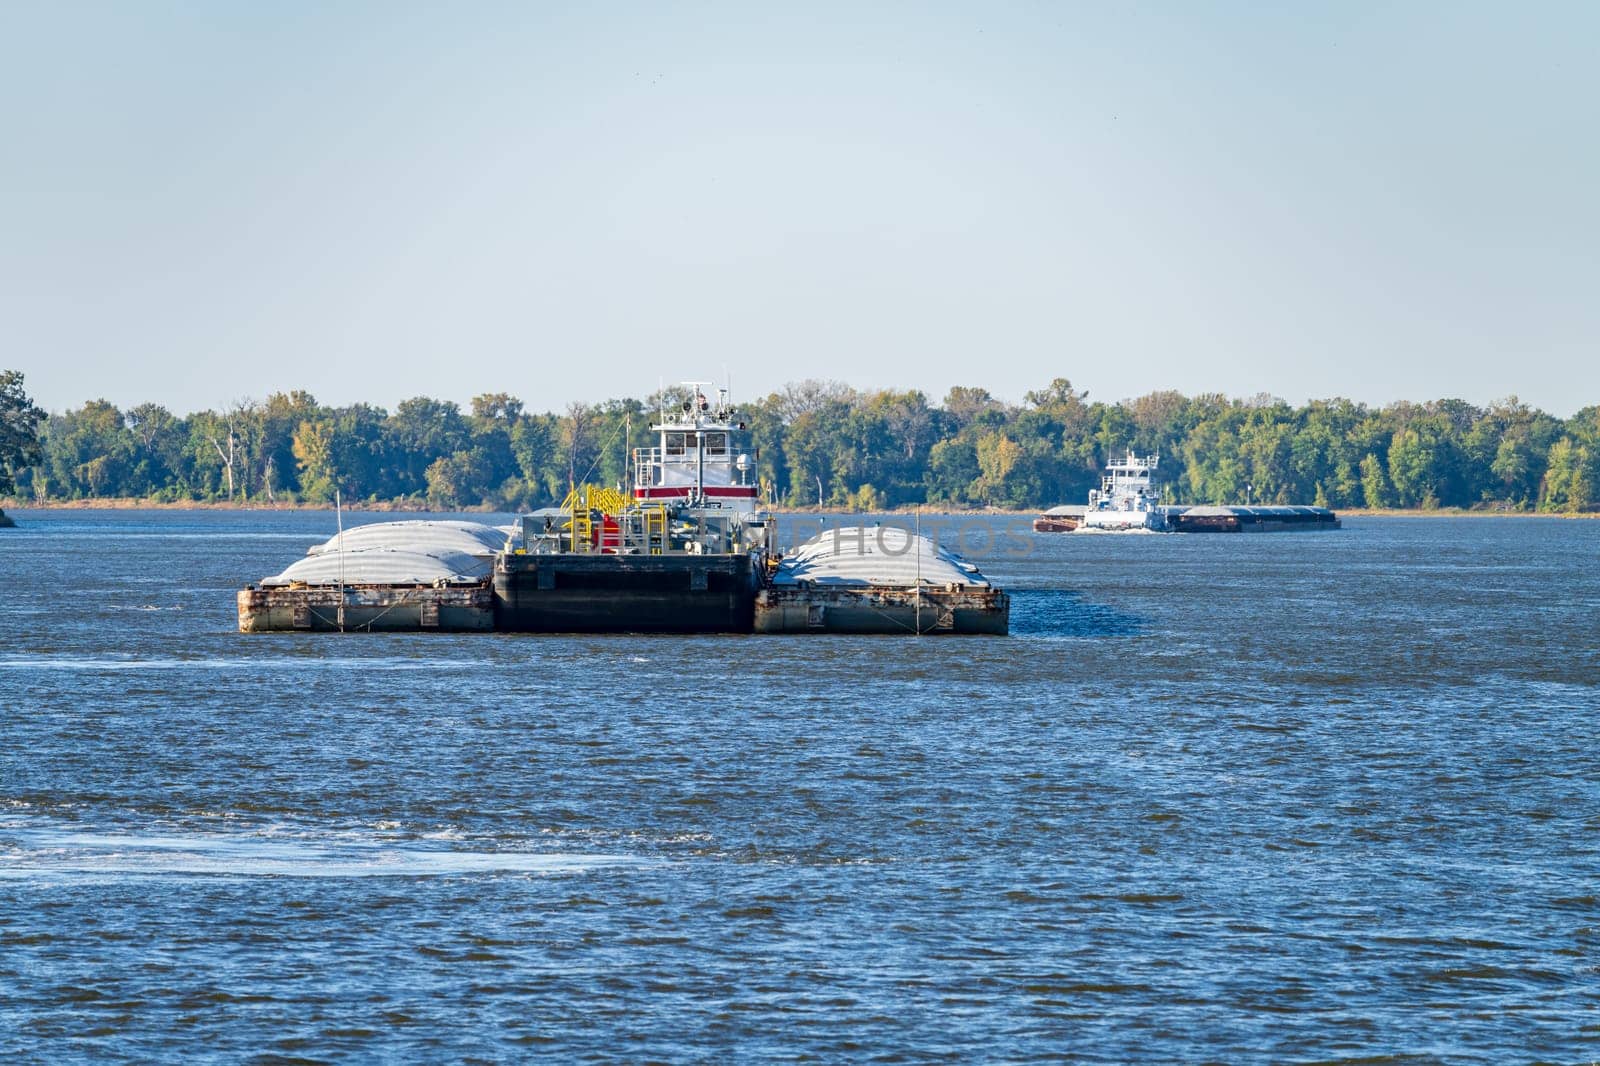 Tug boat pusher behind freight barges loaded with grain on Mississippi River by steheap